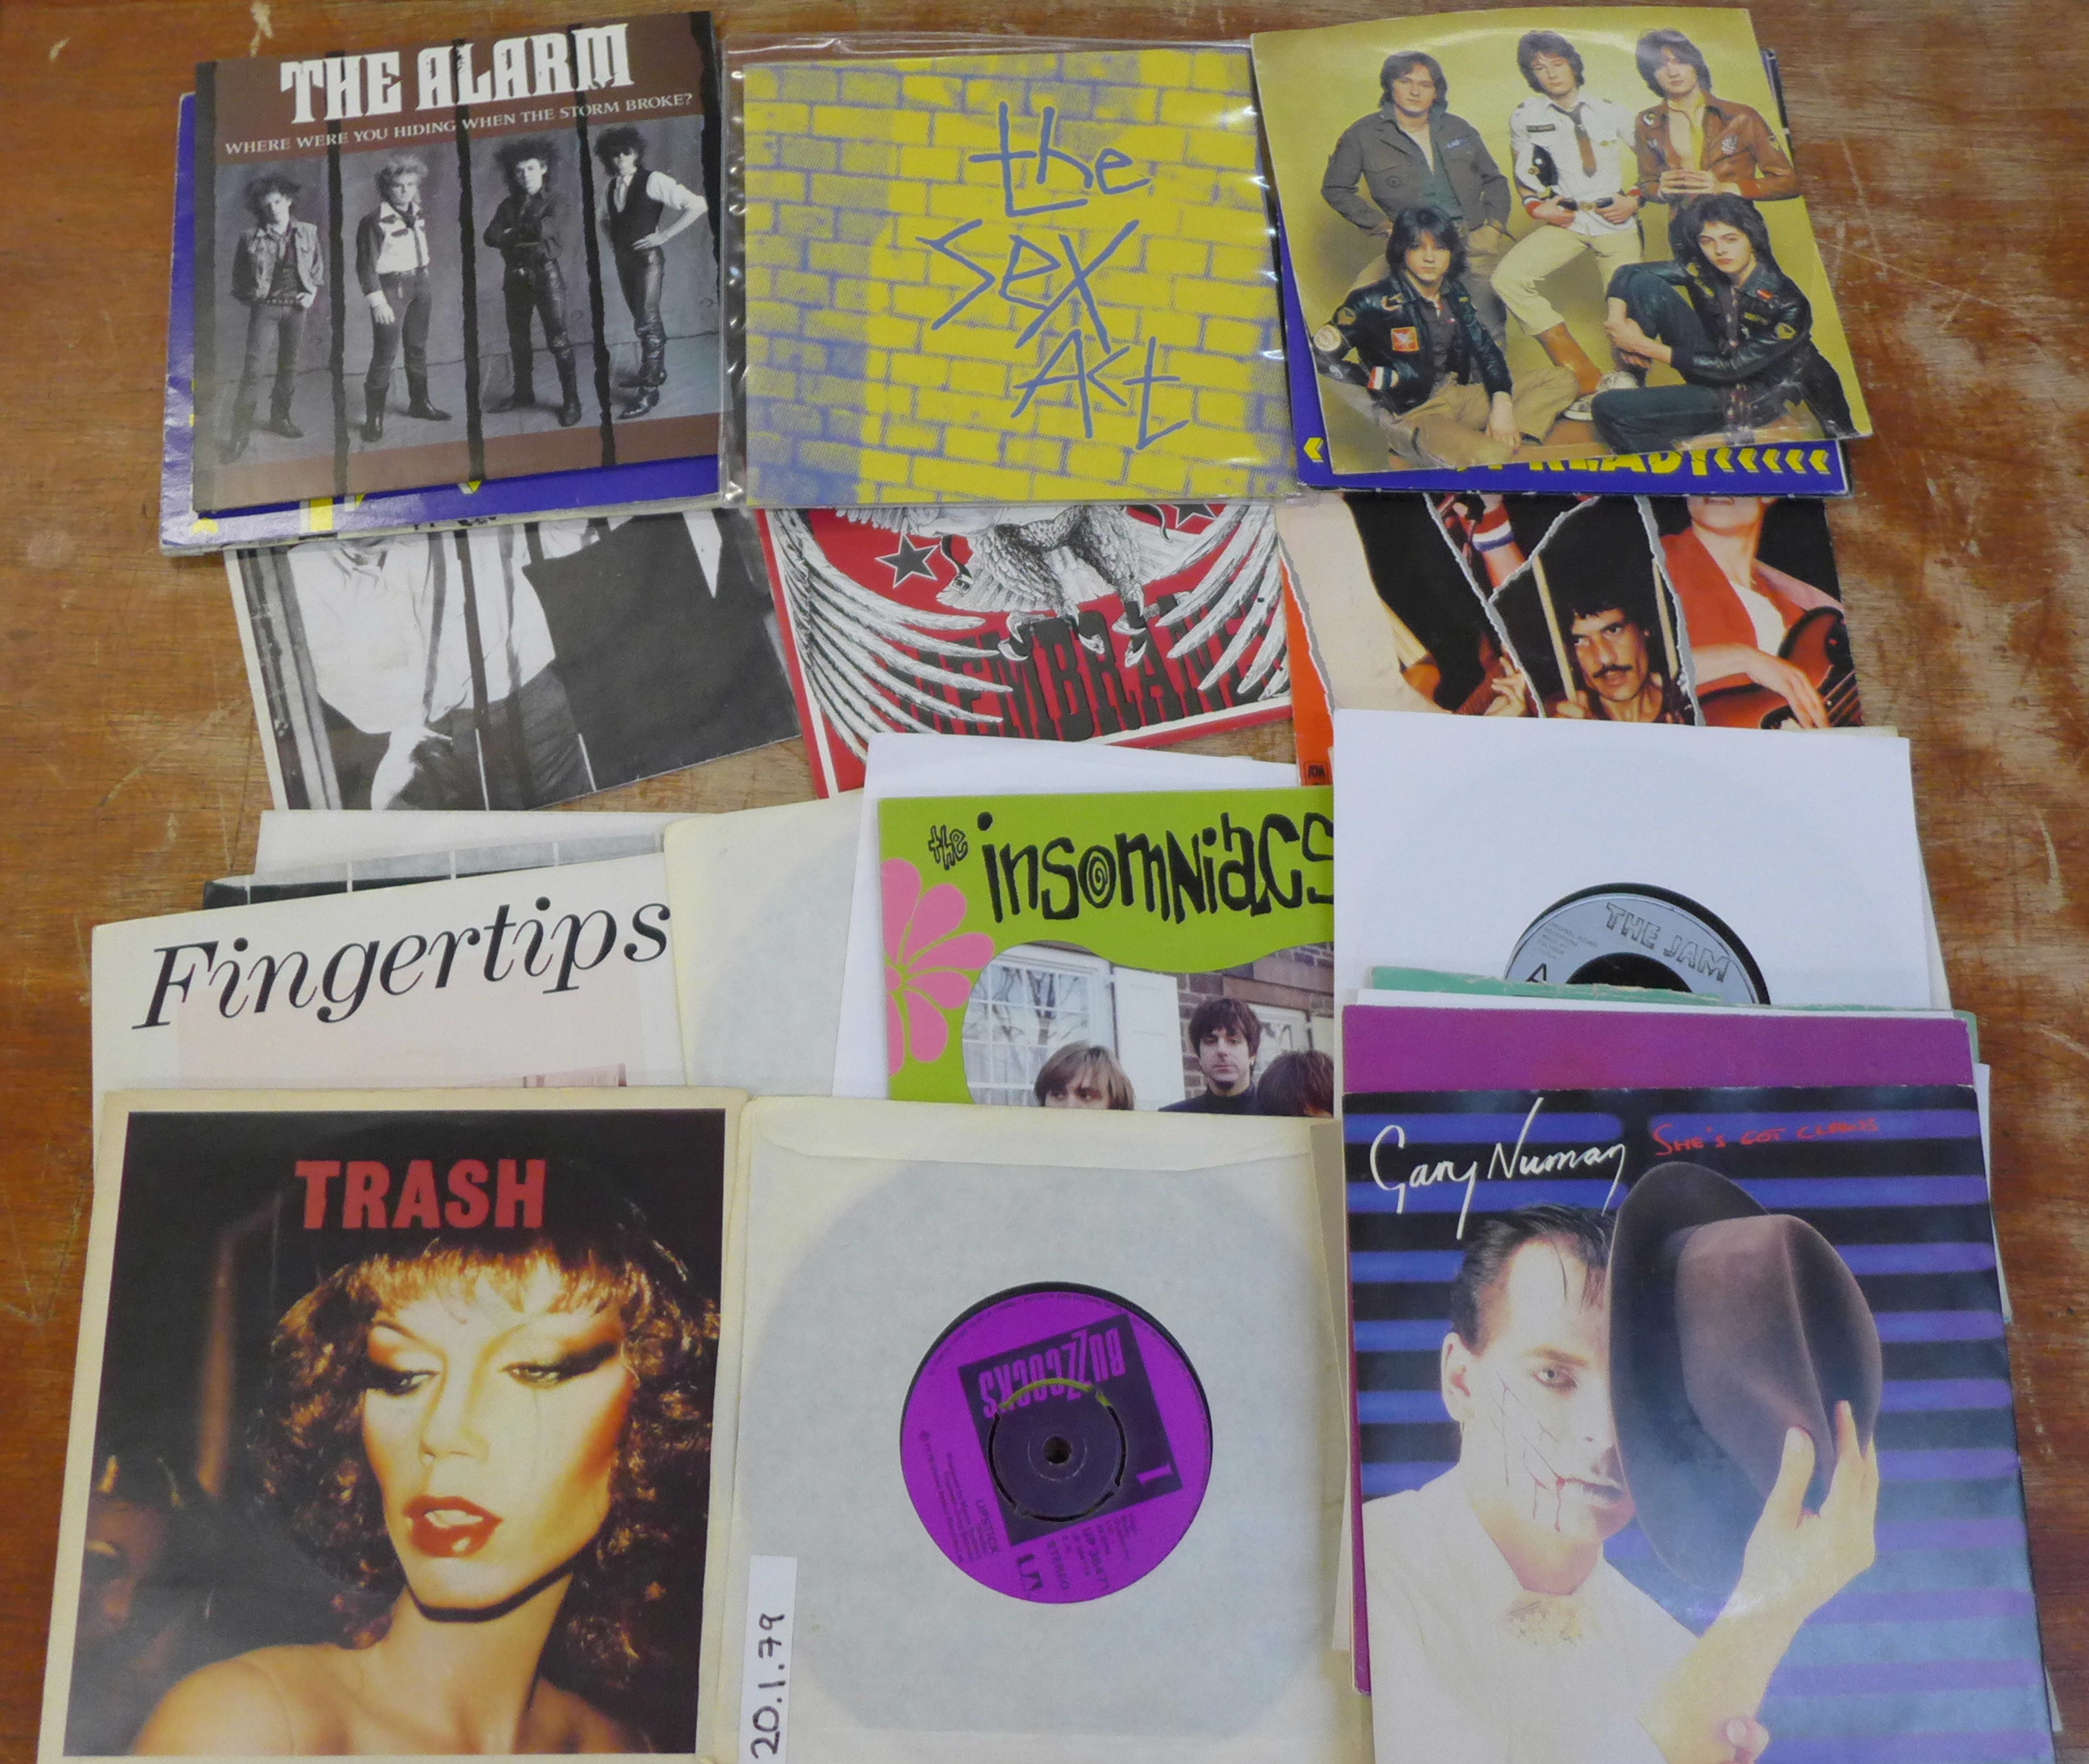 Punk and new wave 7" vinyl singles